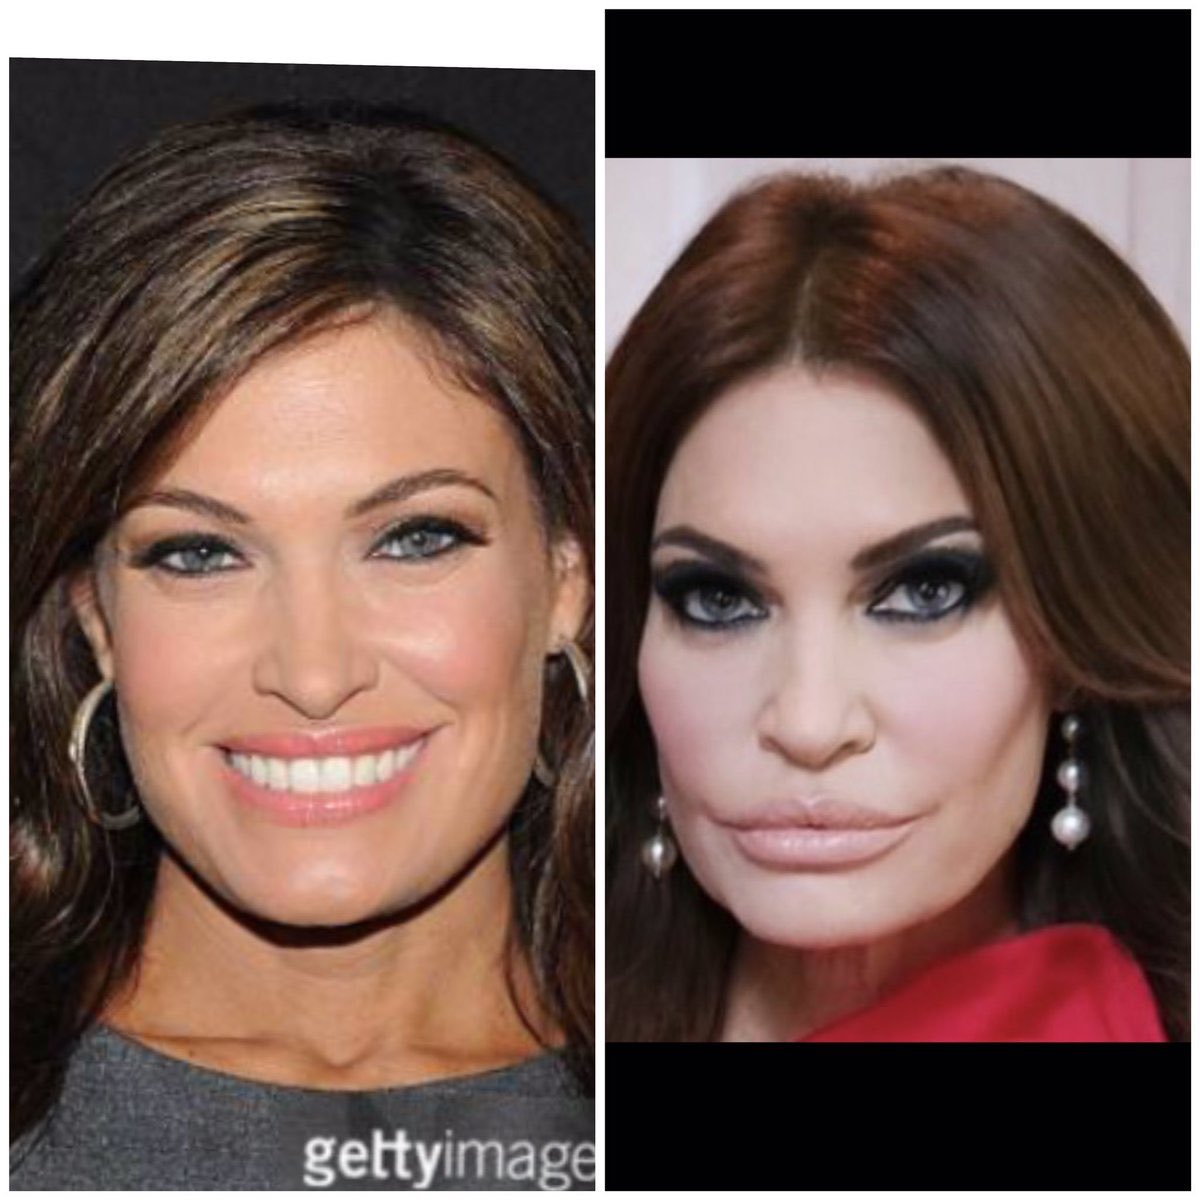 @TheRickWilson @SundaeDivine Fast forward a few years and folks will look at Hope Hicks then and now the way we look at pictures of young Kimberly Guilfoyle and wonder what happened?